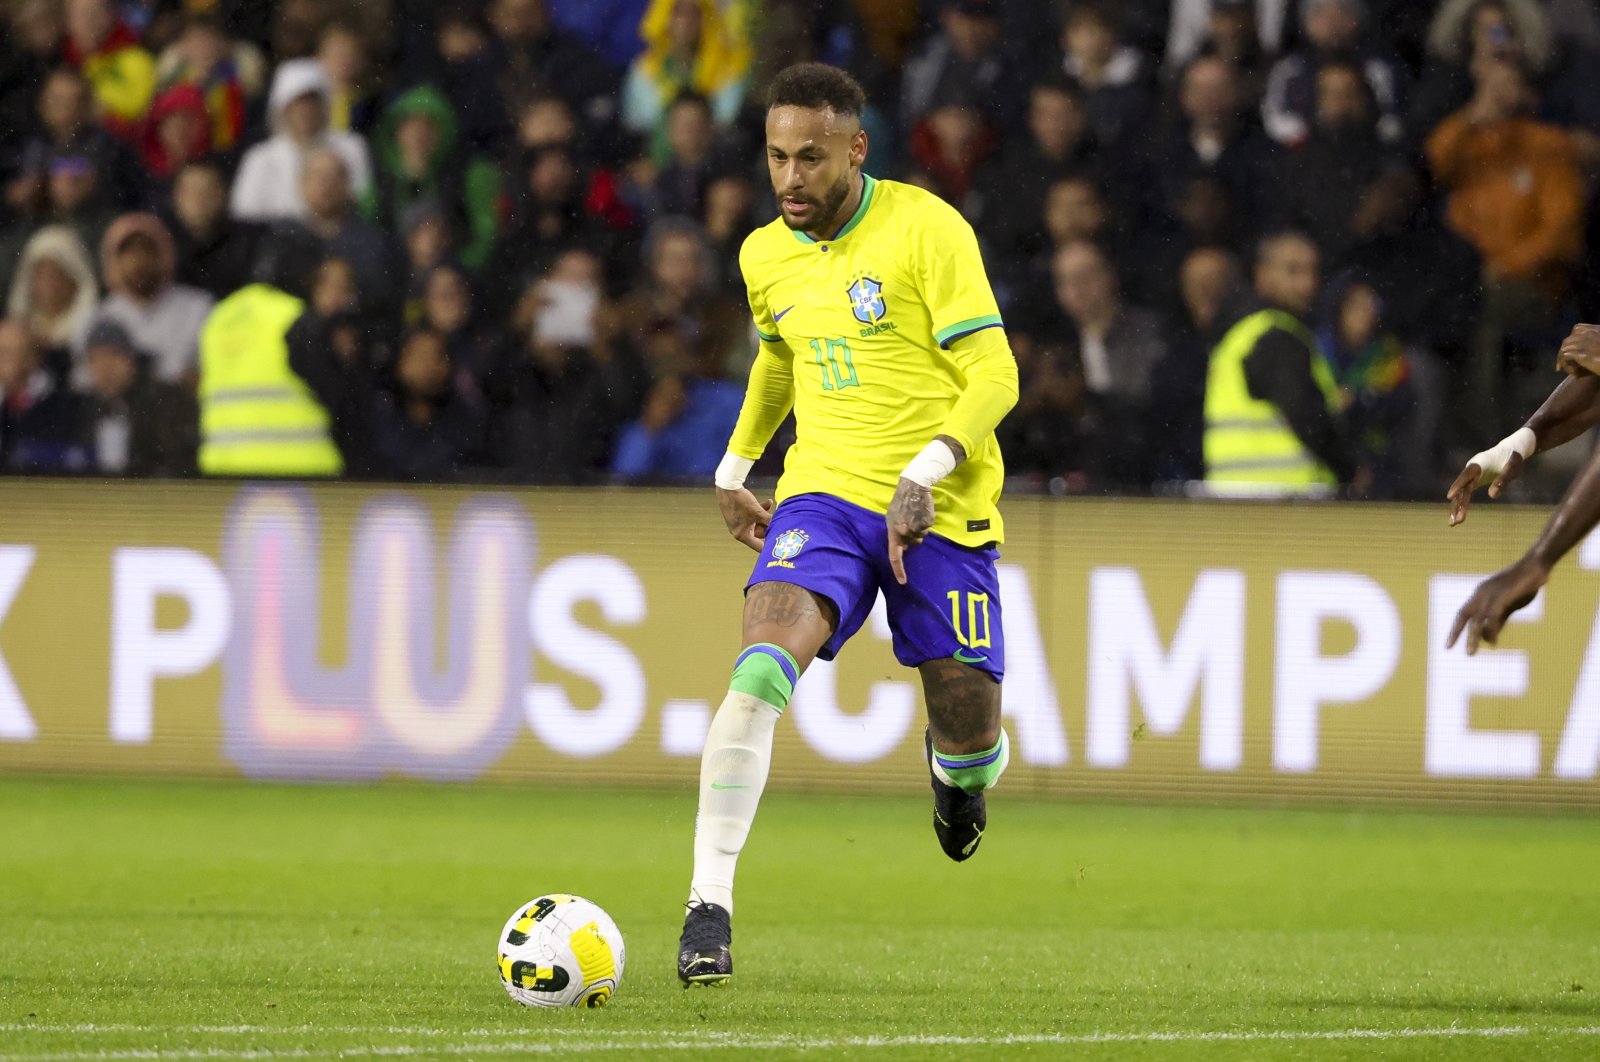 Neymar Jr. of Brazil during the international friendly match between Brazil and Ghana at Stade Oceane, Le Havre, France, Sept. 23, 2022. (Getty Images Photo)